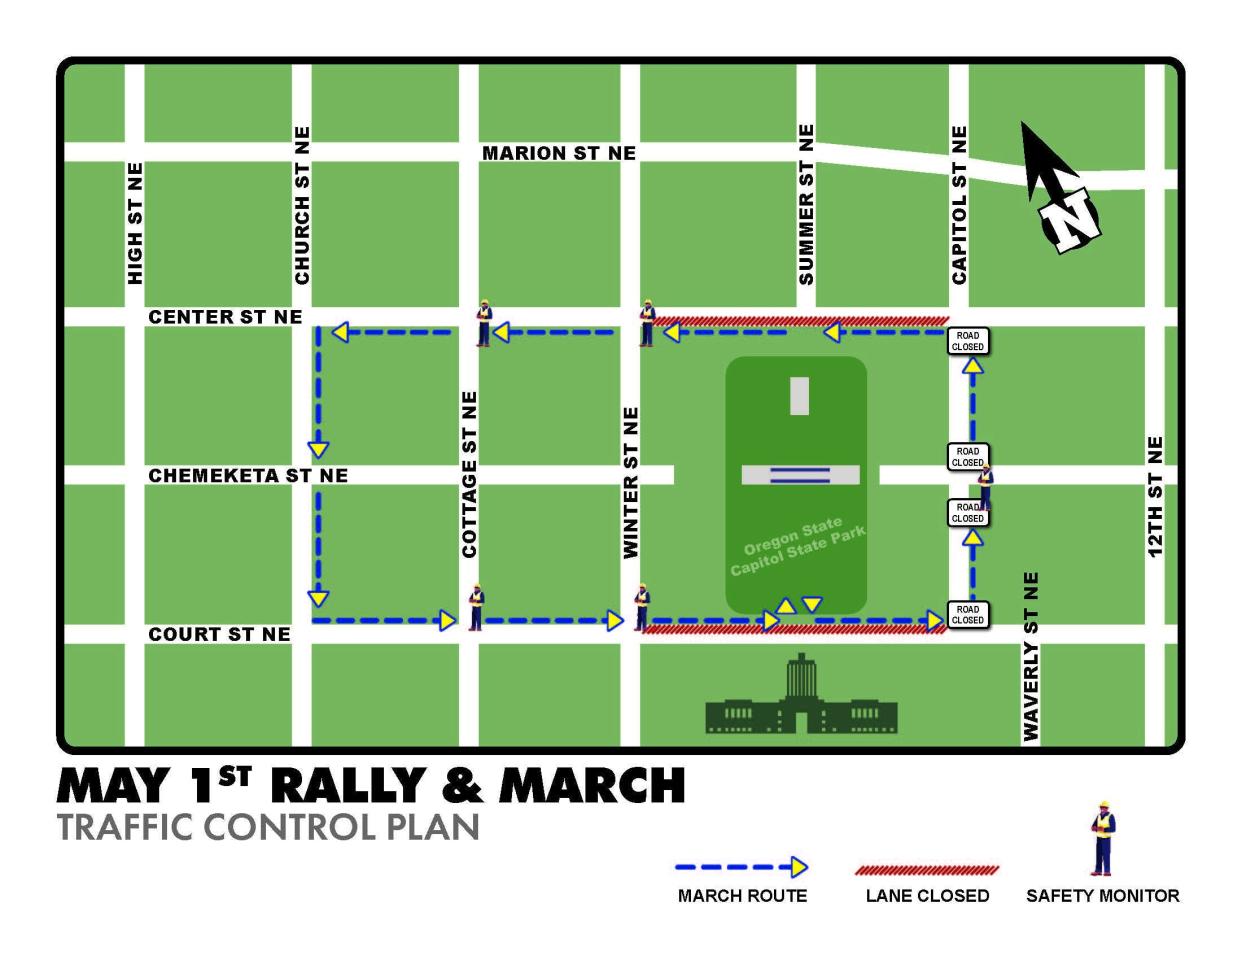 Road closures and lane restrictions are expected from 1:30-3:30 p.m. Wednesday around the Capitol Mall.